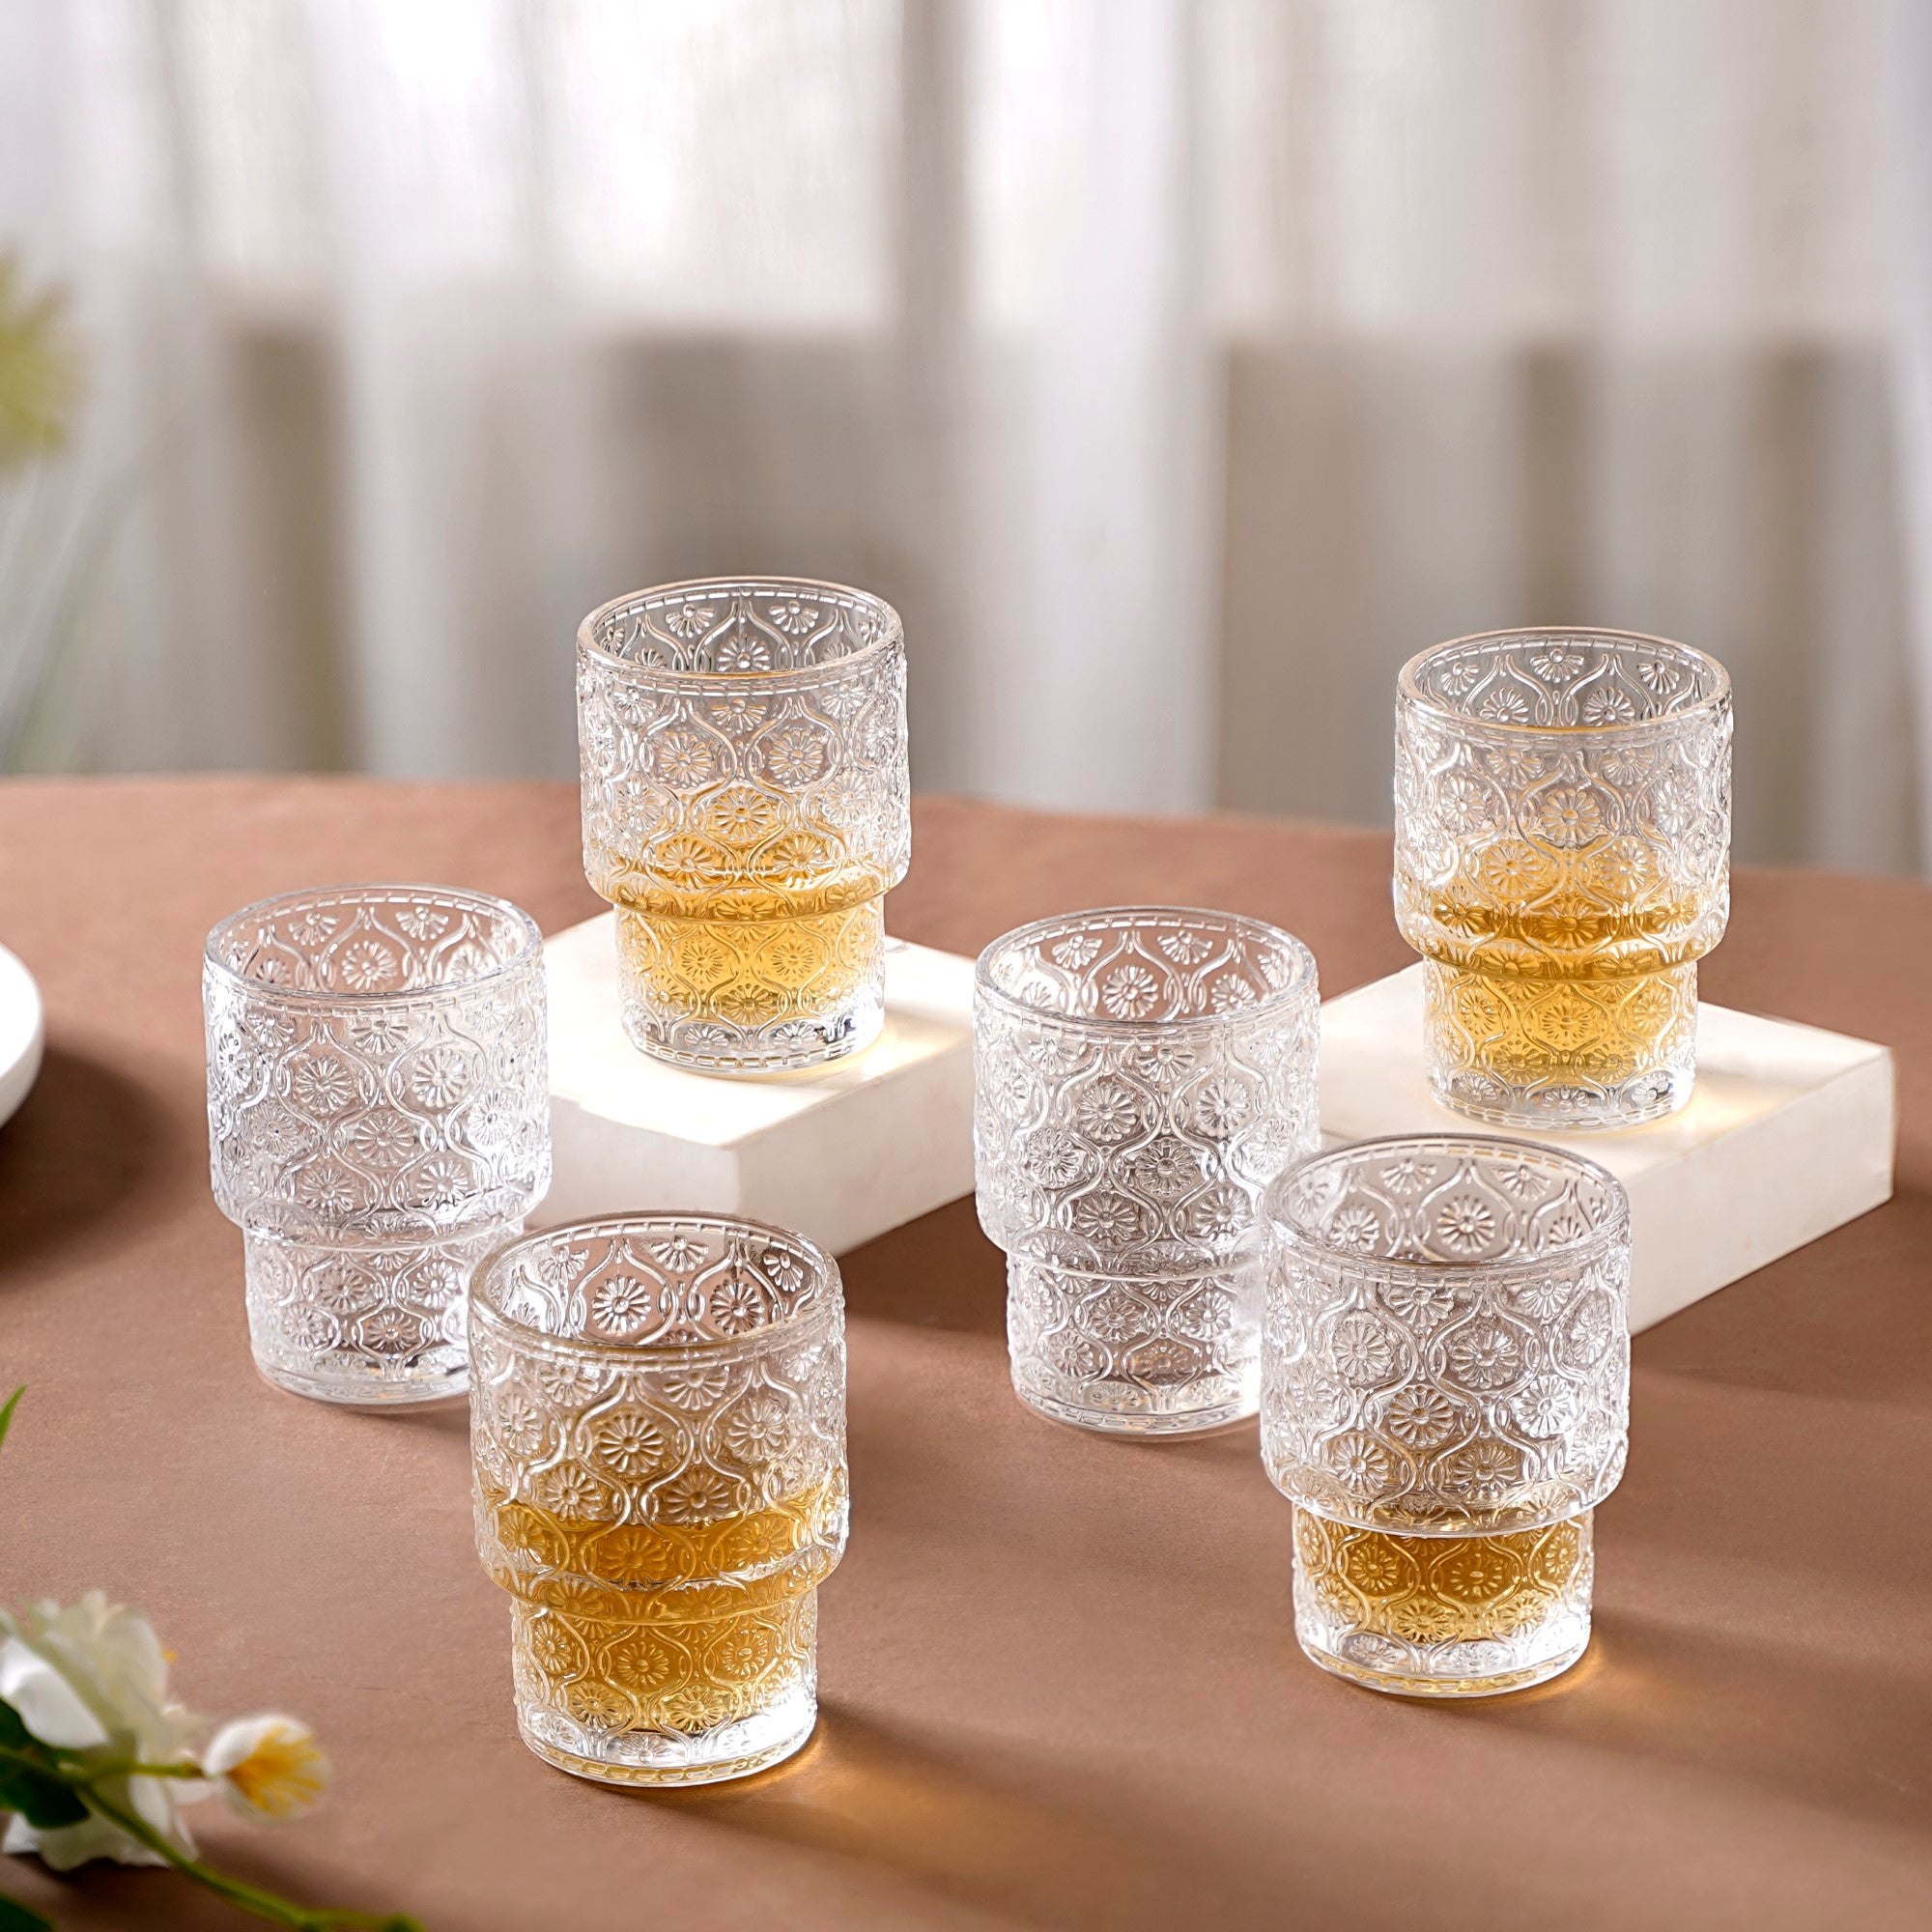 Shop glass tumblers Online in India